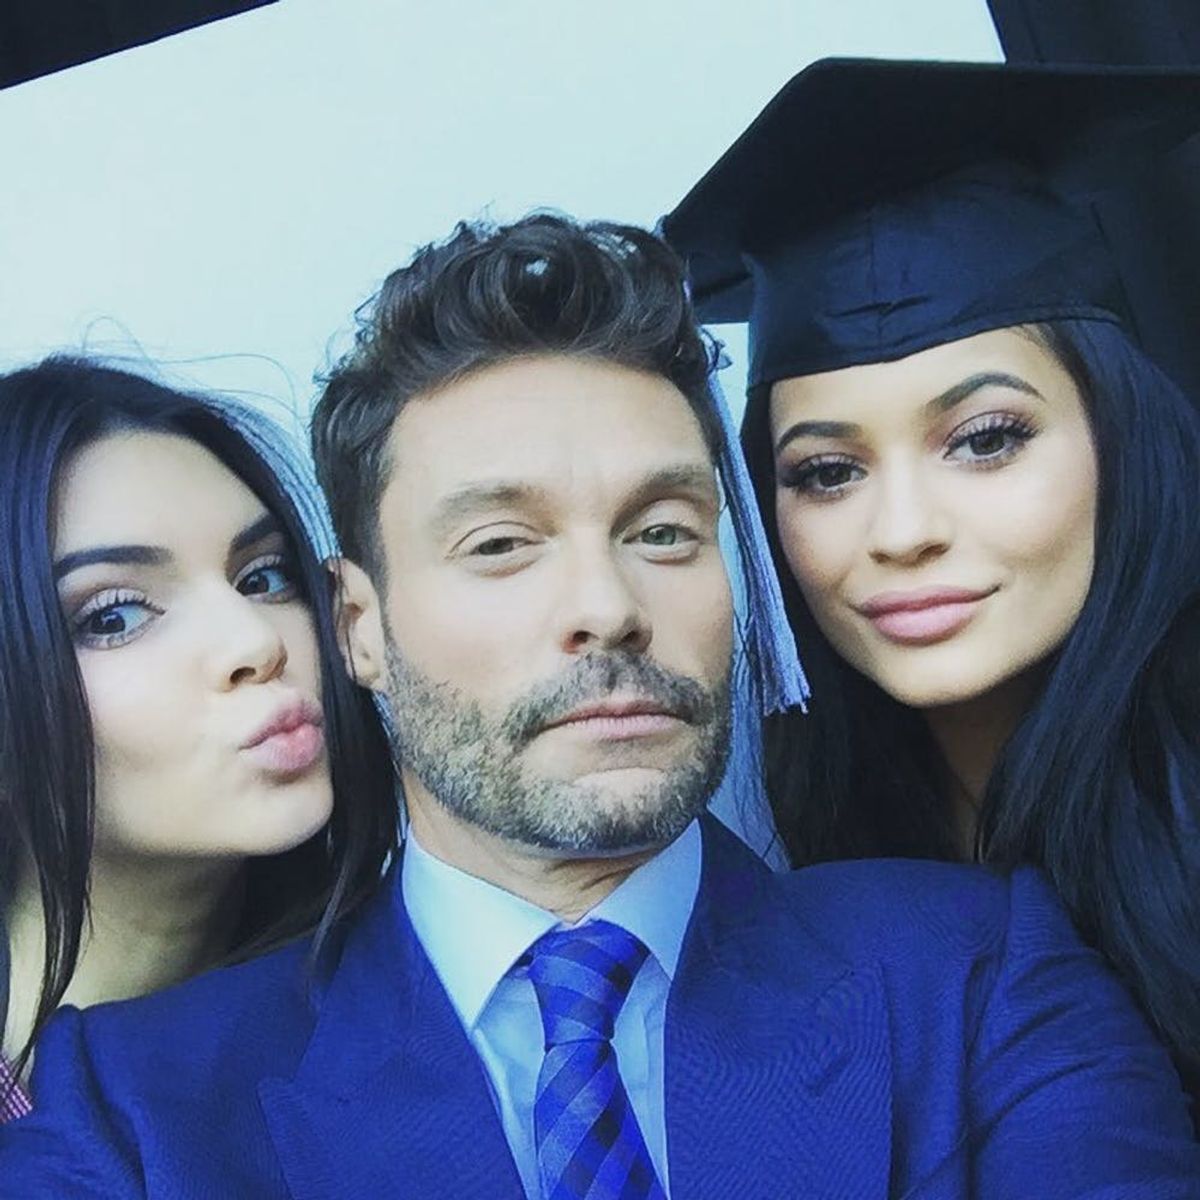 You’ll Never Guess Who Threw Kendall and Kylie a Graduation Party